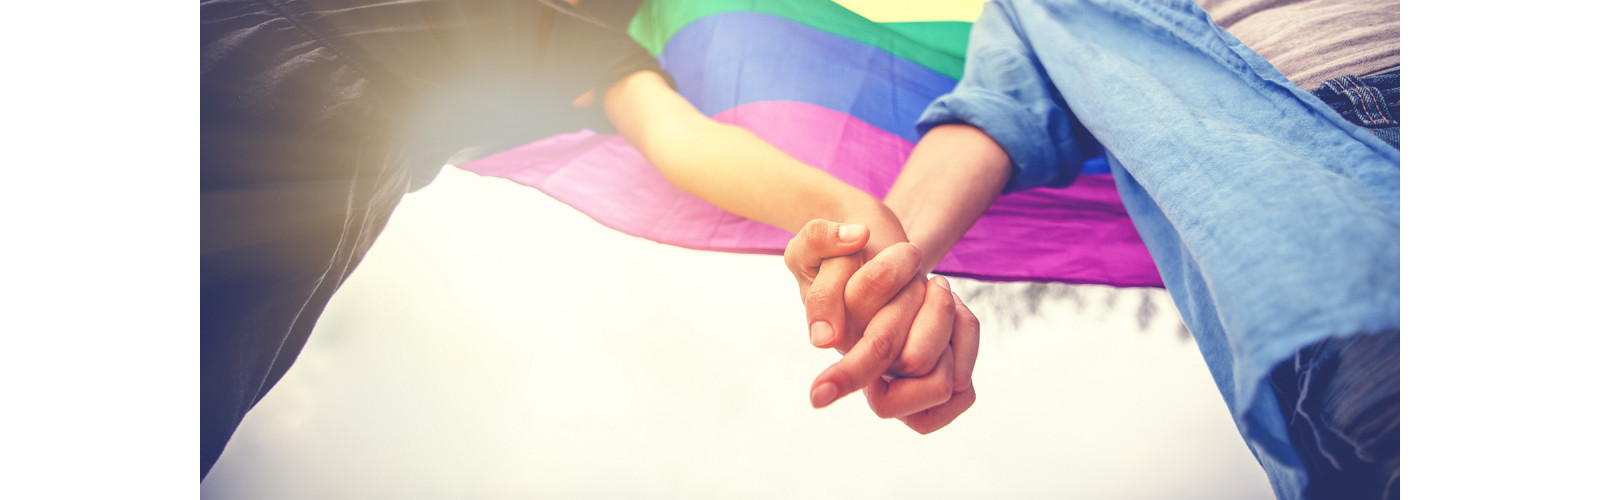 How to promote LGBTQ+ allyship and action in the workplace